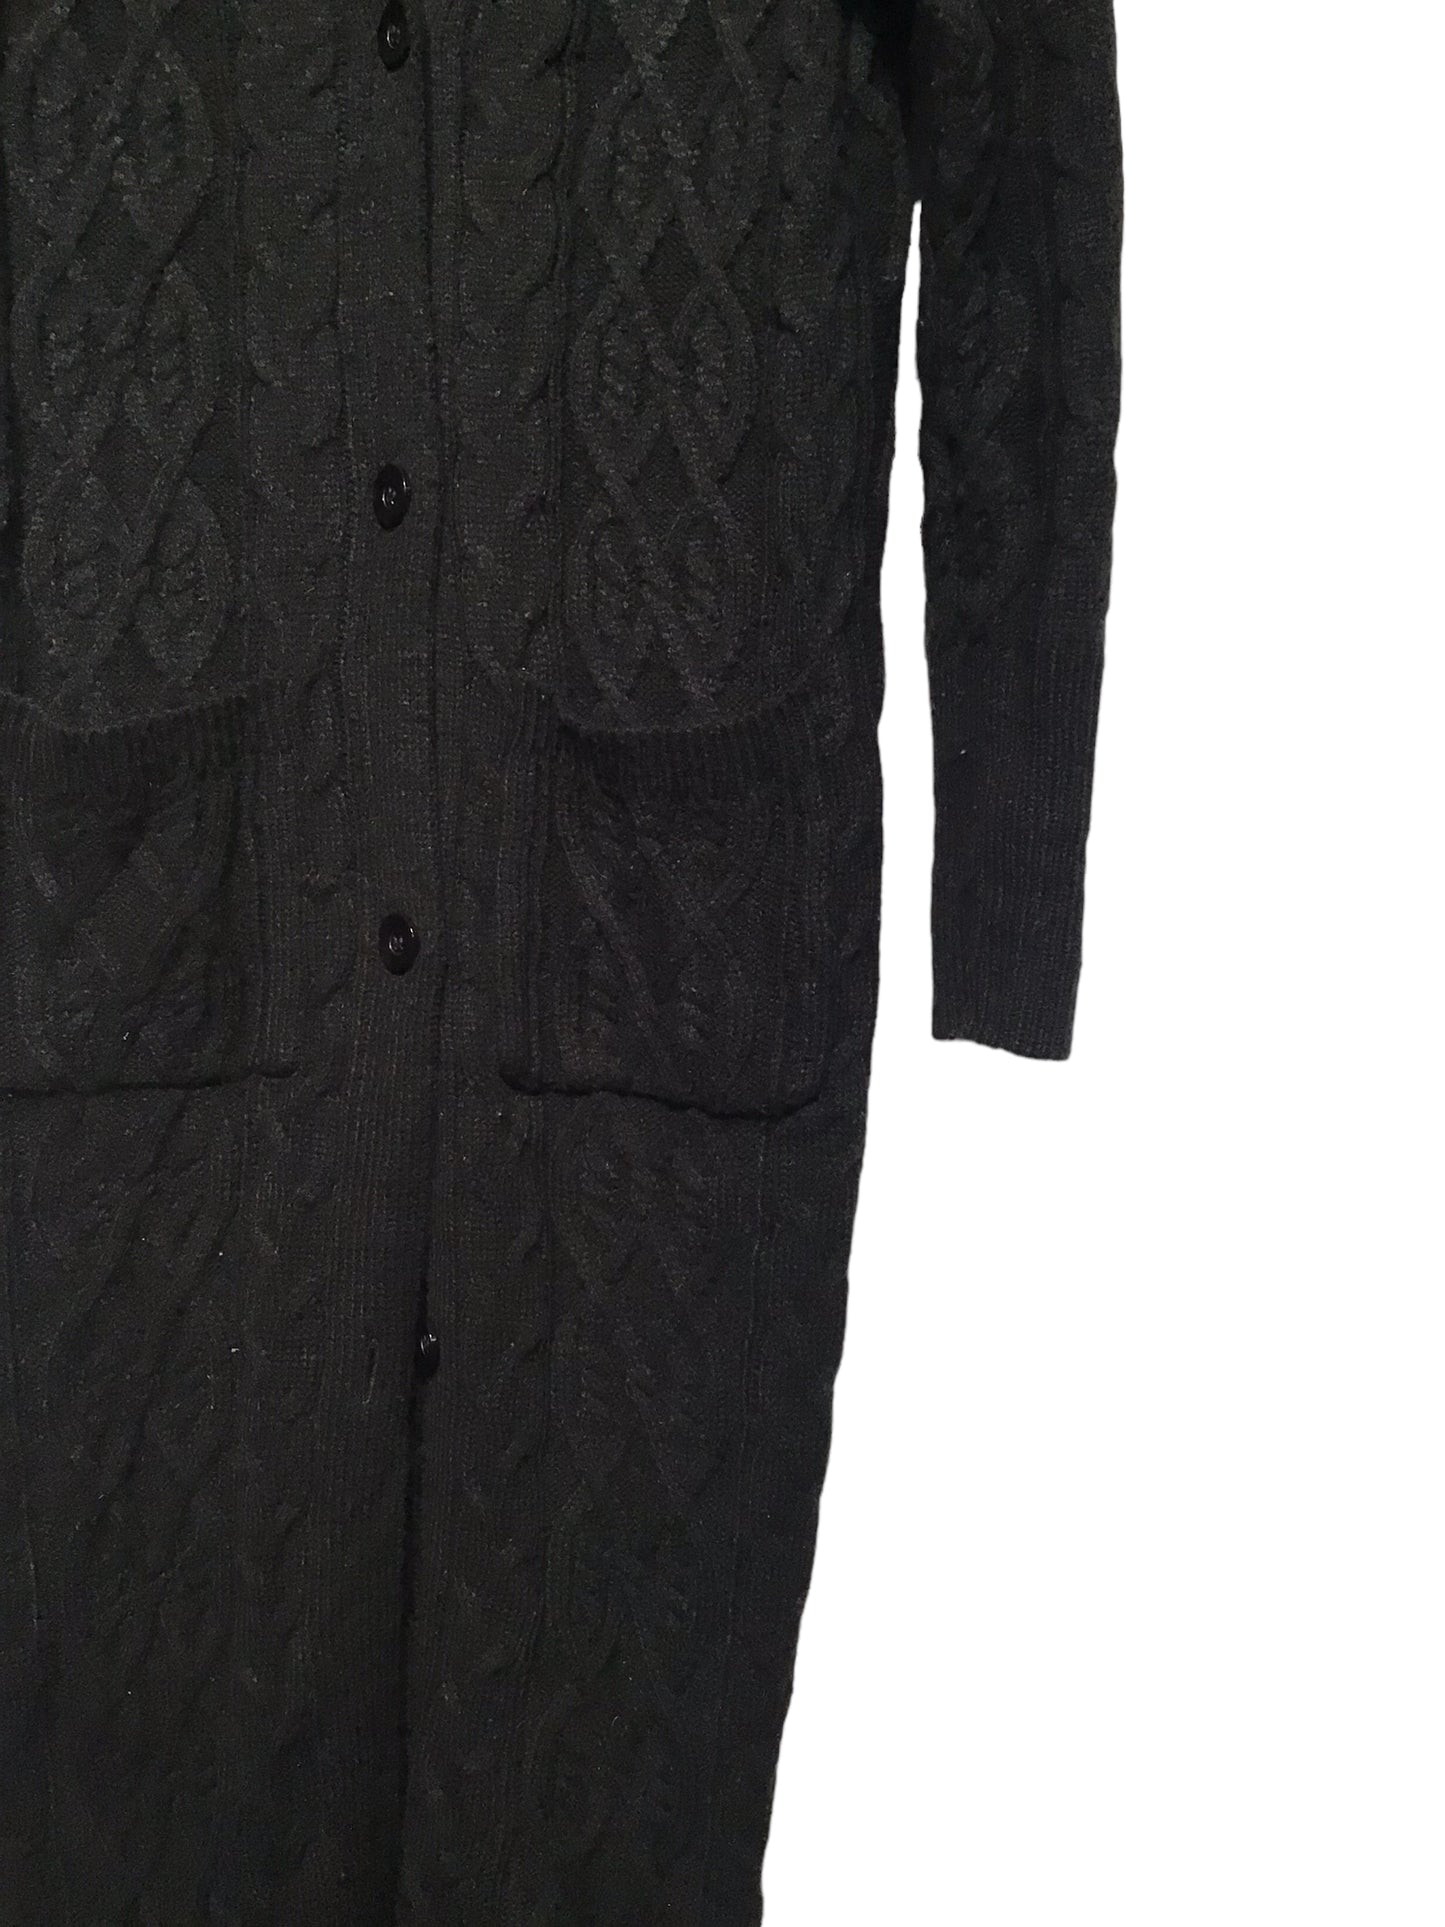 Black Long Length Knitted Cardigan (Size XL)